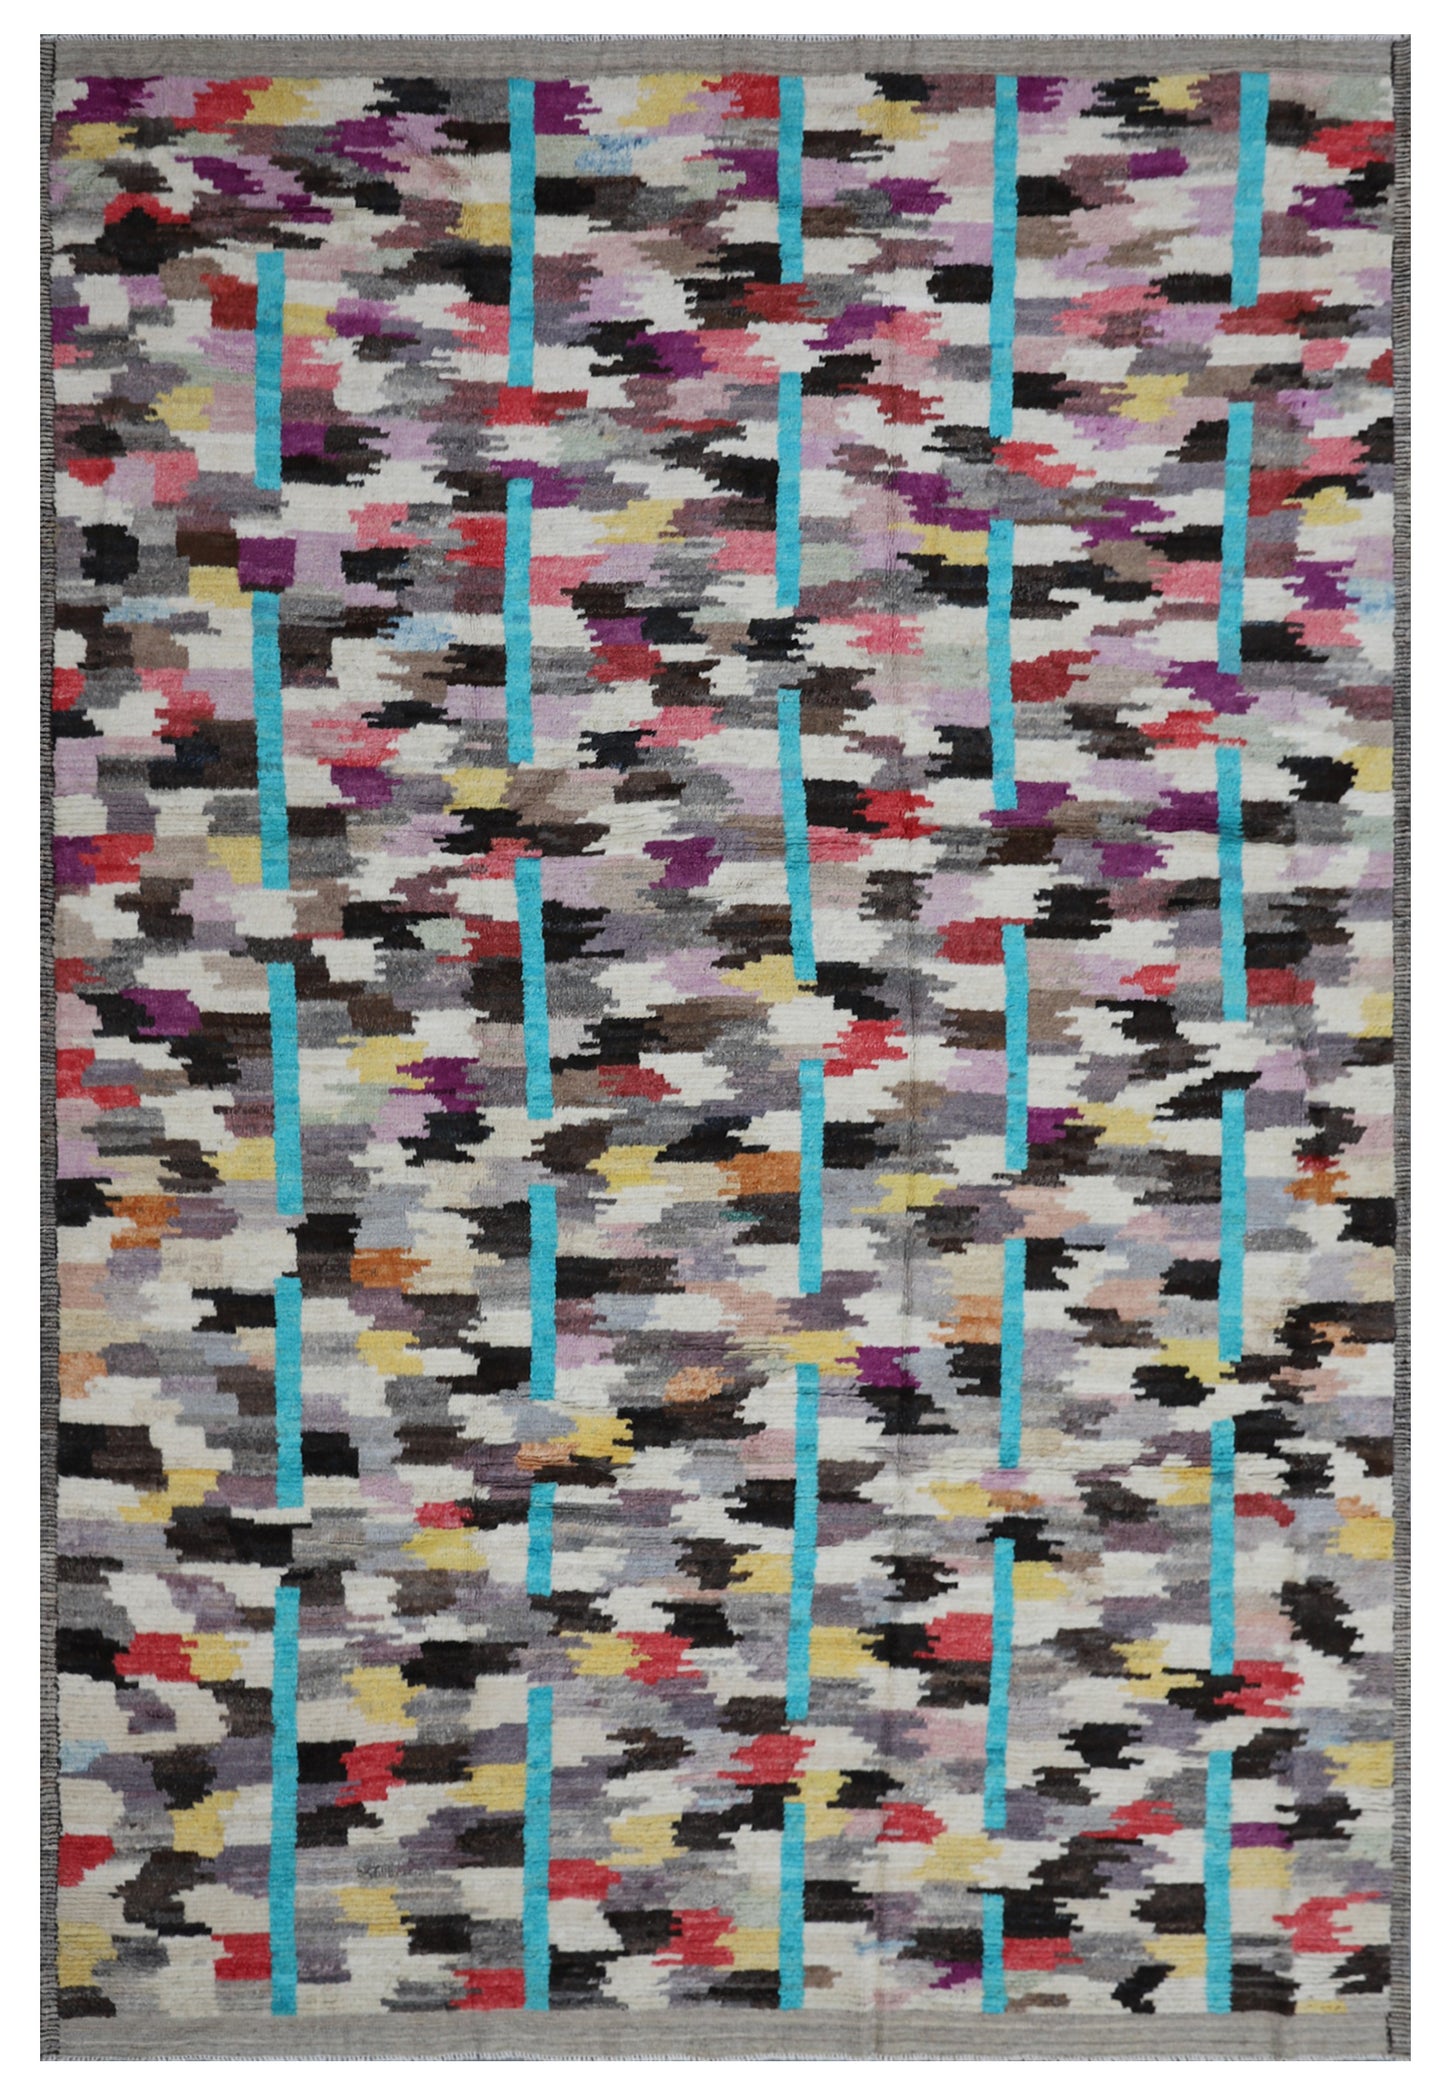 9'x12' Colorful Hand Knotted Shag Long Pile Ariana Barchi Rug